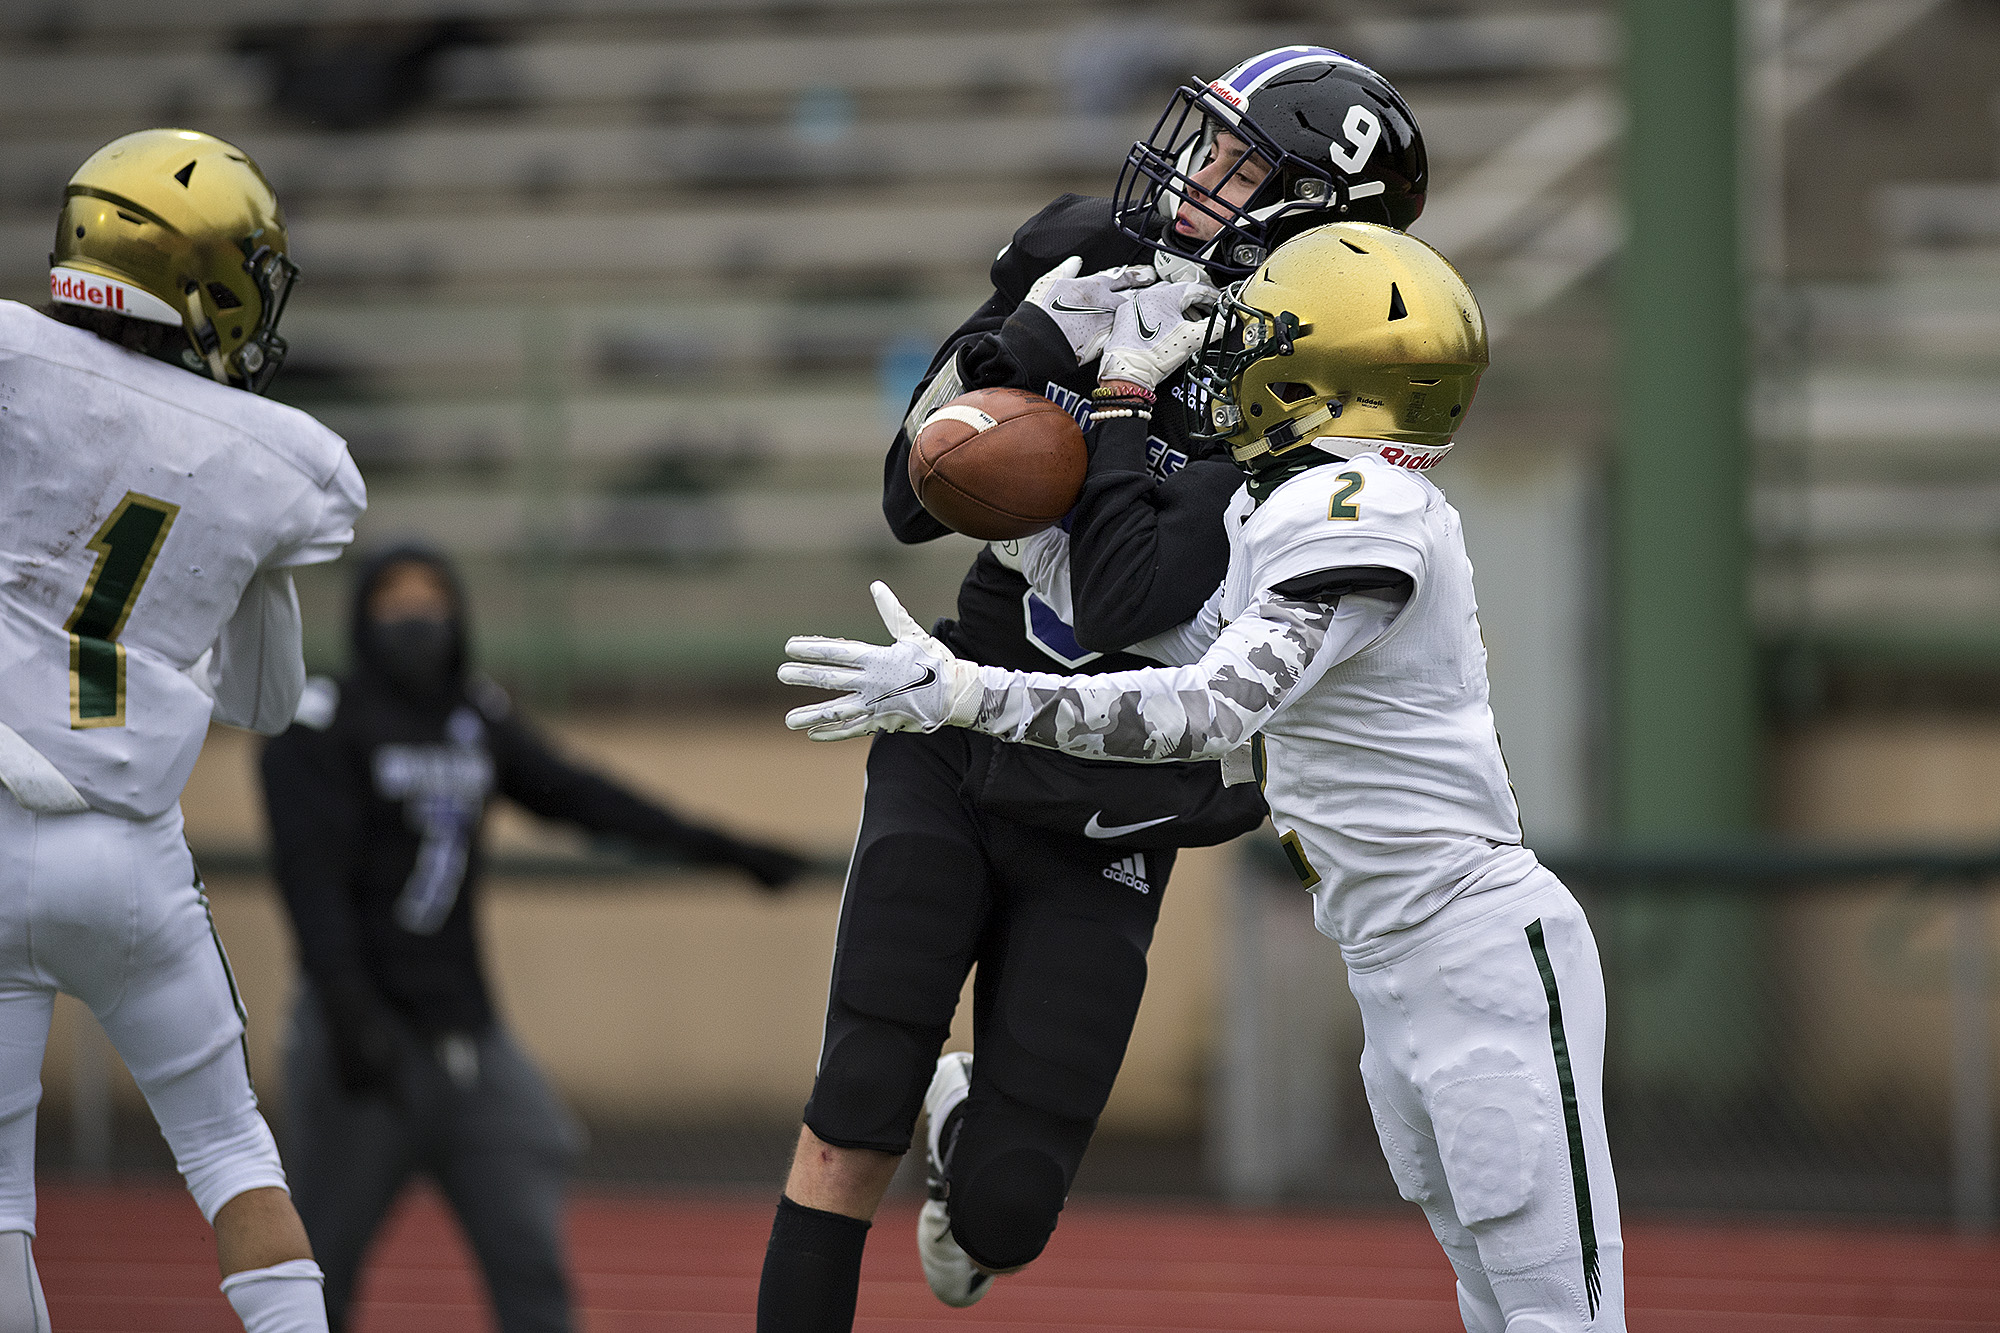 Heritage receiver Alex Anderson (9) is unable to hang onto a pass as Evergreen defender Jonathan Simon (2) breaks up the play in the second quarter as stands at McKenzie Stadium are empty due to COVID-19 concerns on Friday afternoon, March 5, 2021.